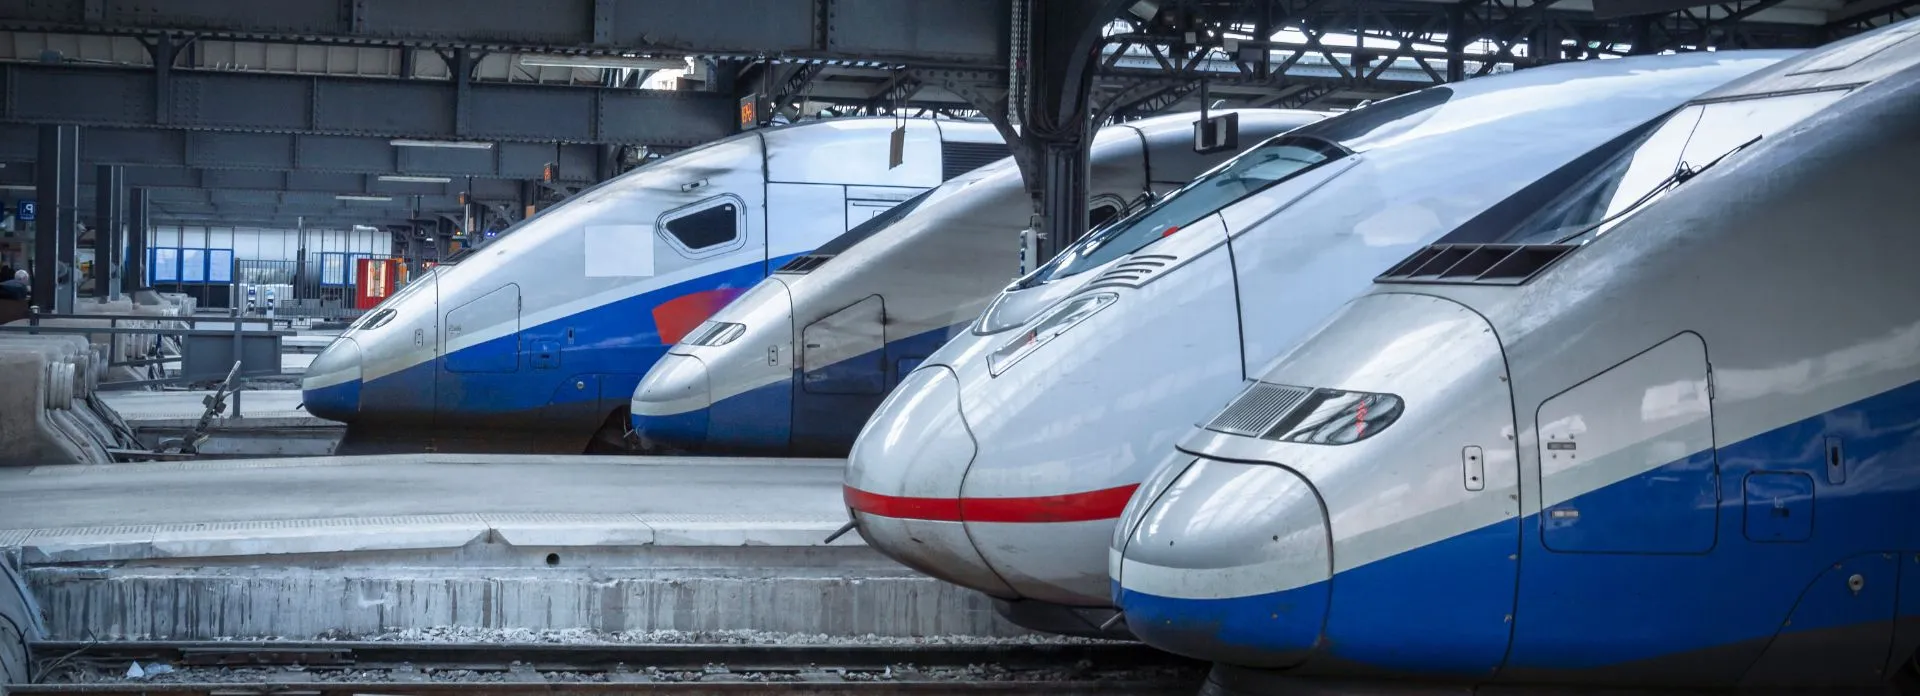 DELMIA Rail Planning and Operations in Logistics and Workforce > Dassault Systèmes